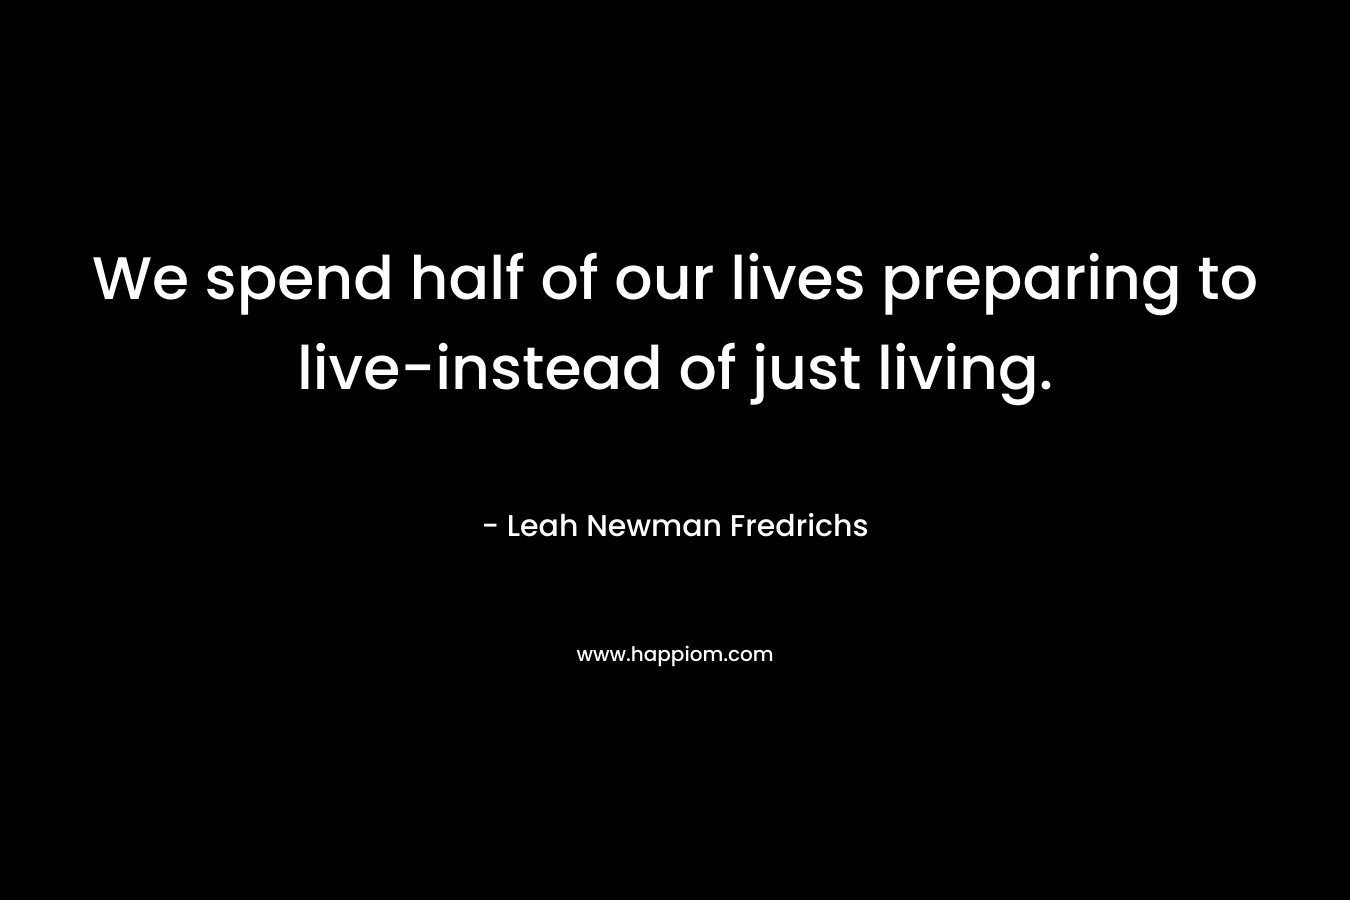 We spend half of our lives preparing to live-instead of just living.